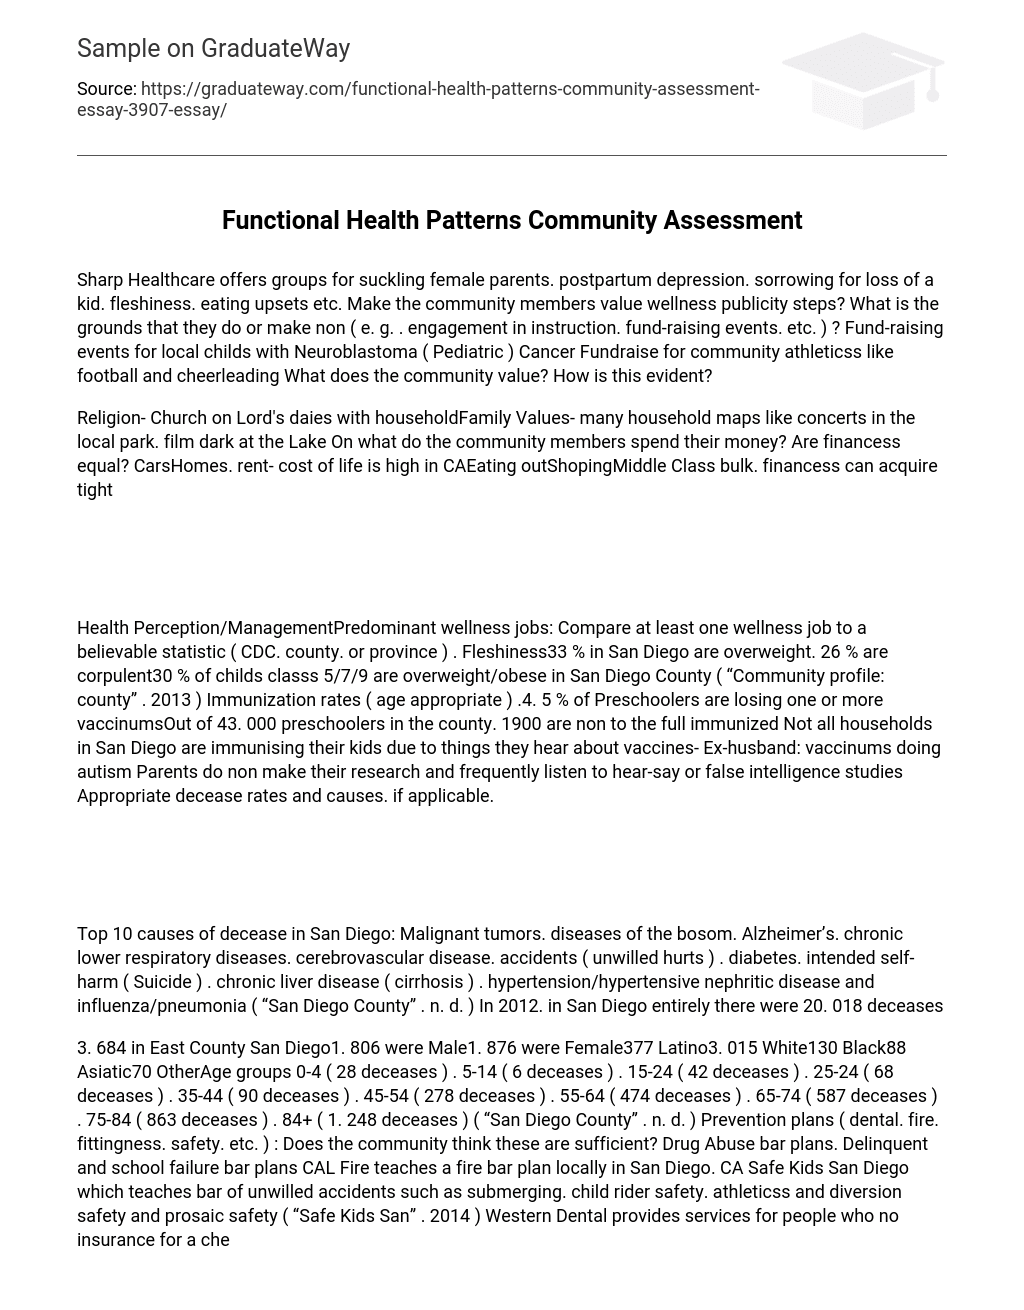 Functional Health Patterns Community Assessment